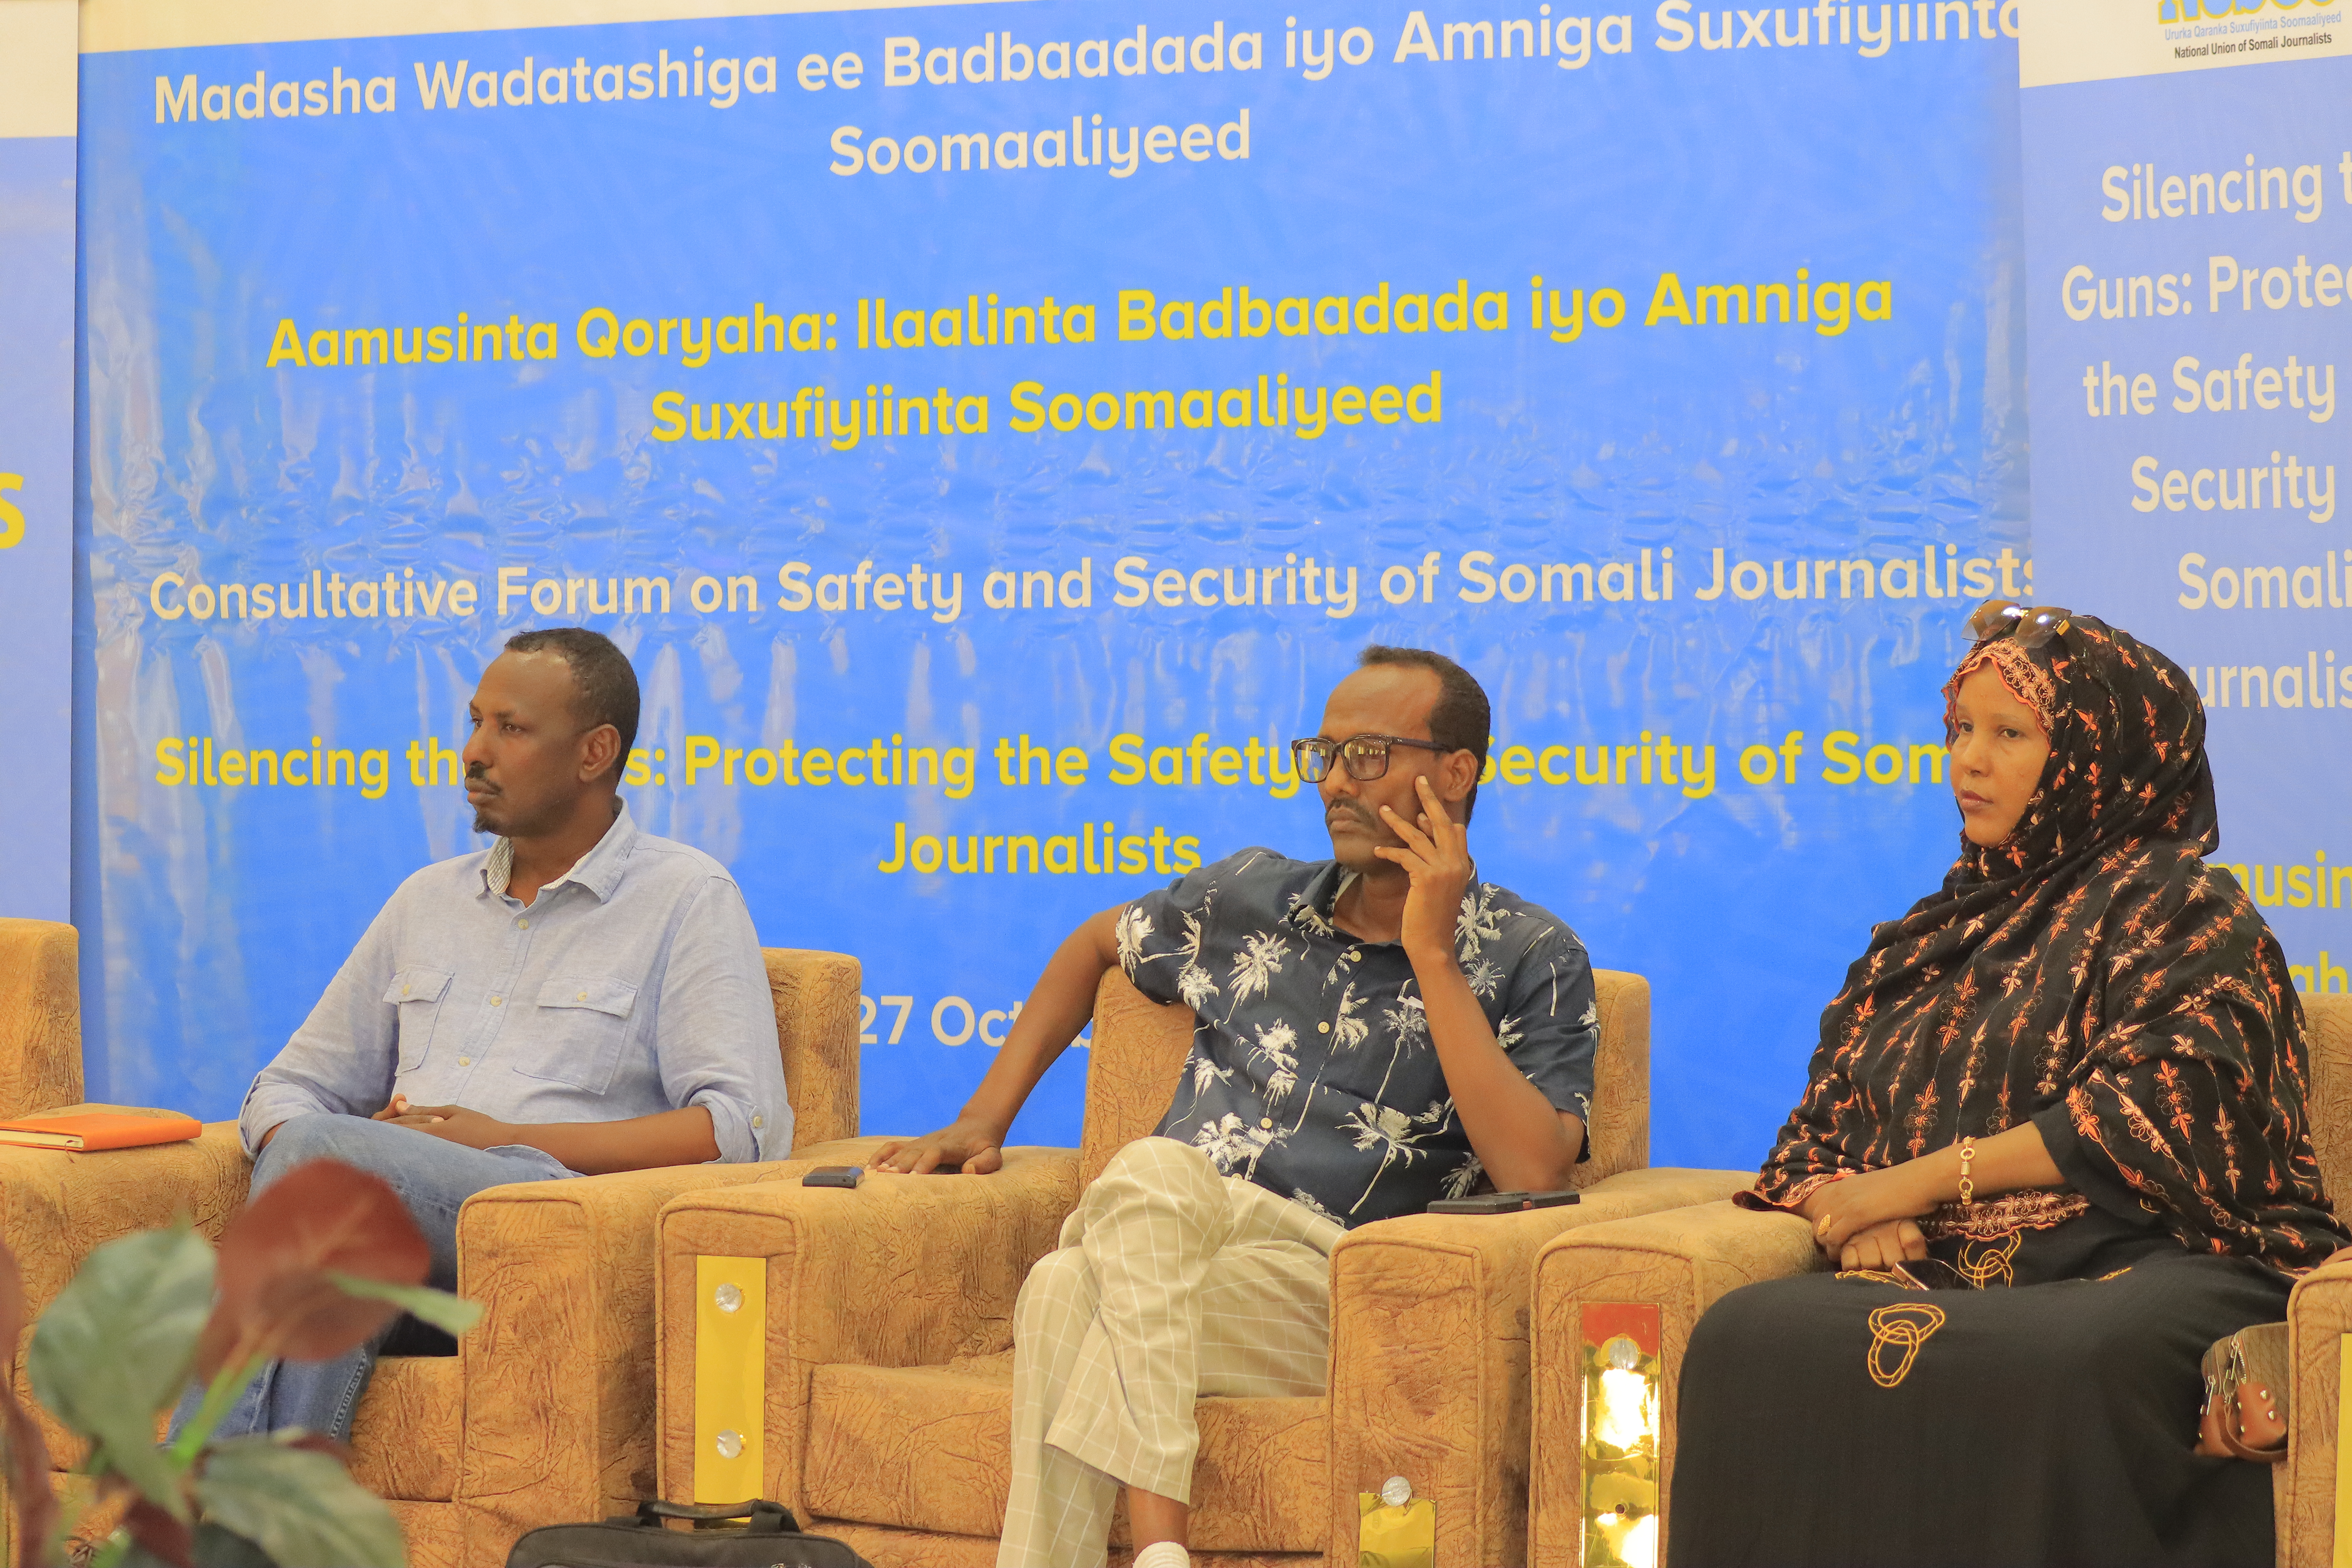 Puntland and Galmudug journalists join forces in search of safety and security for journalists through professional solidarity